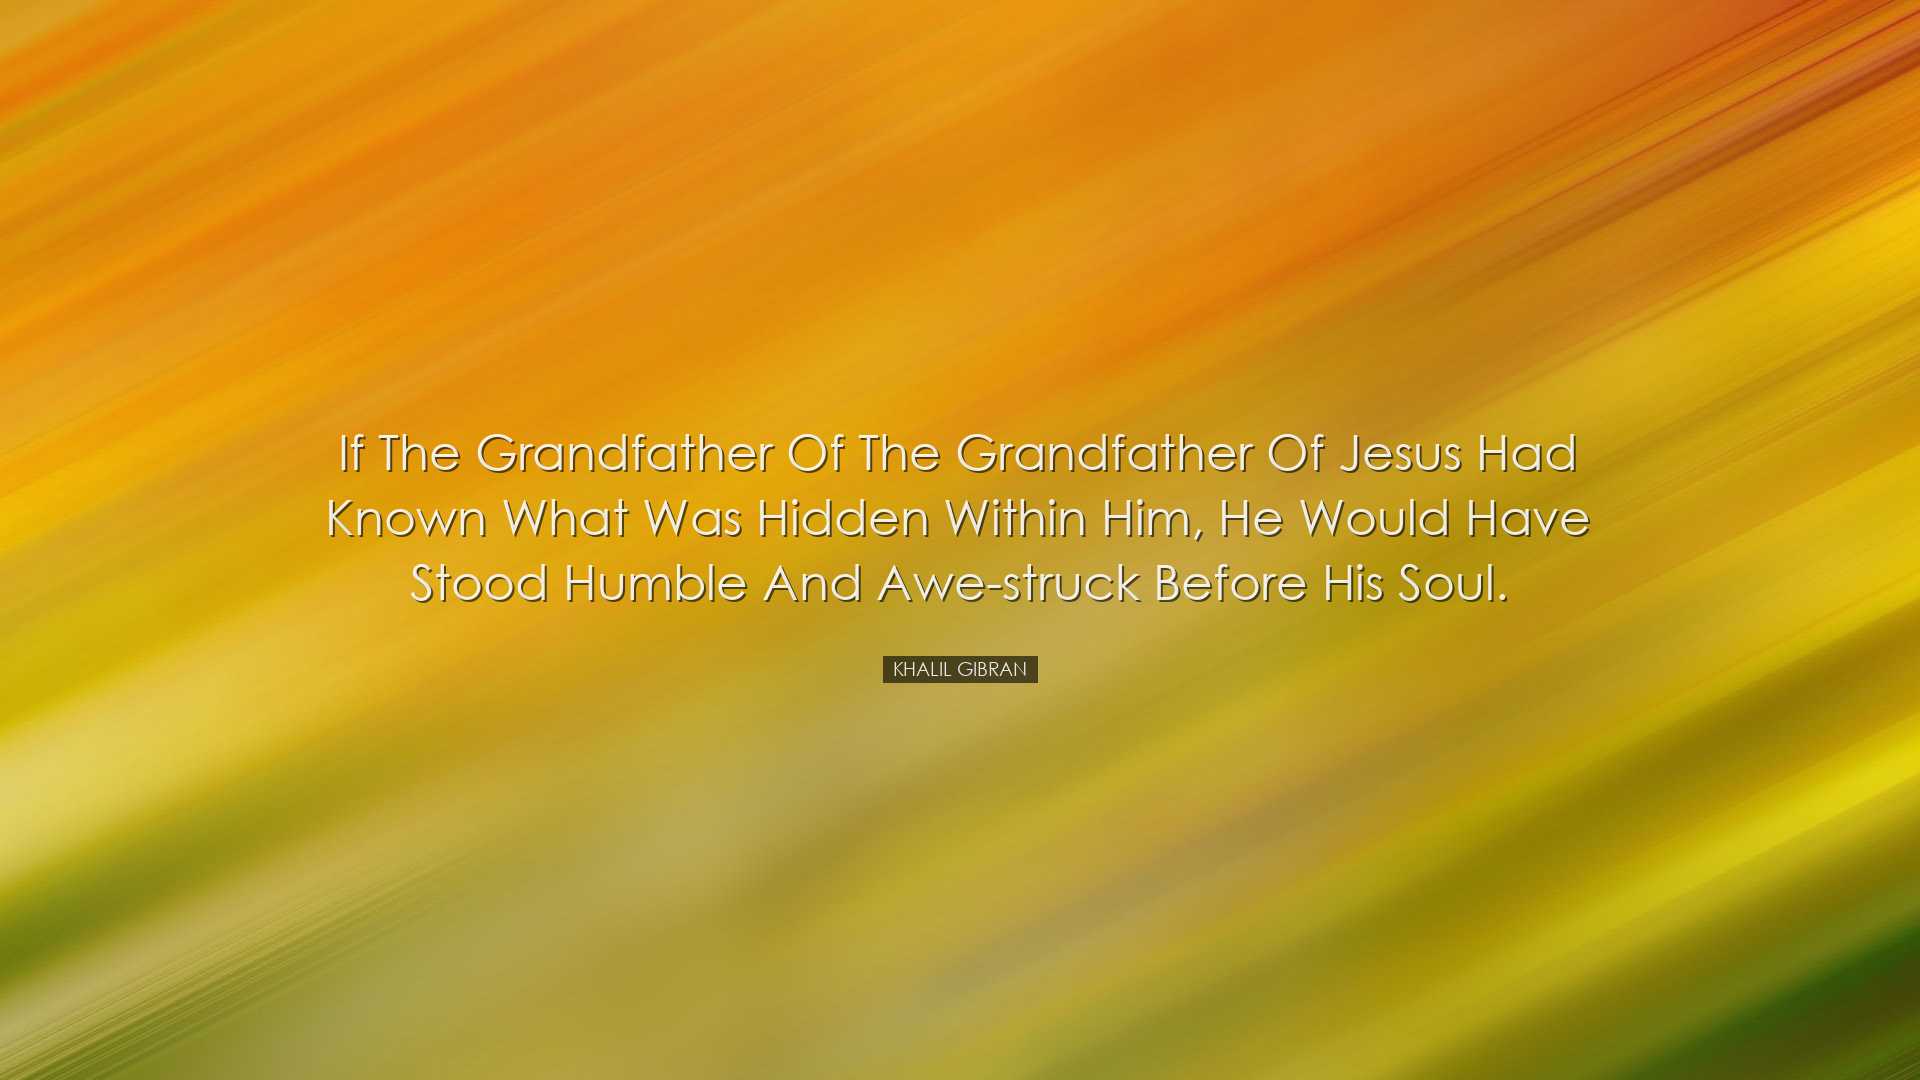 If the grandfather of the grandfather of Jesus had known what was